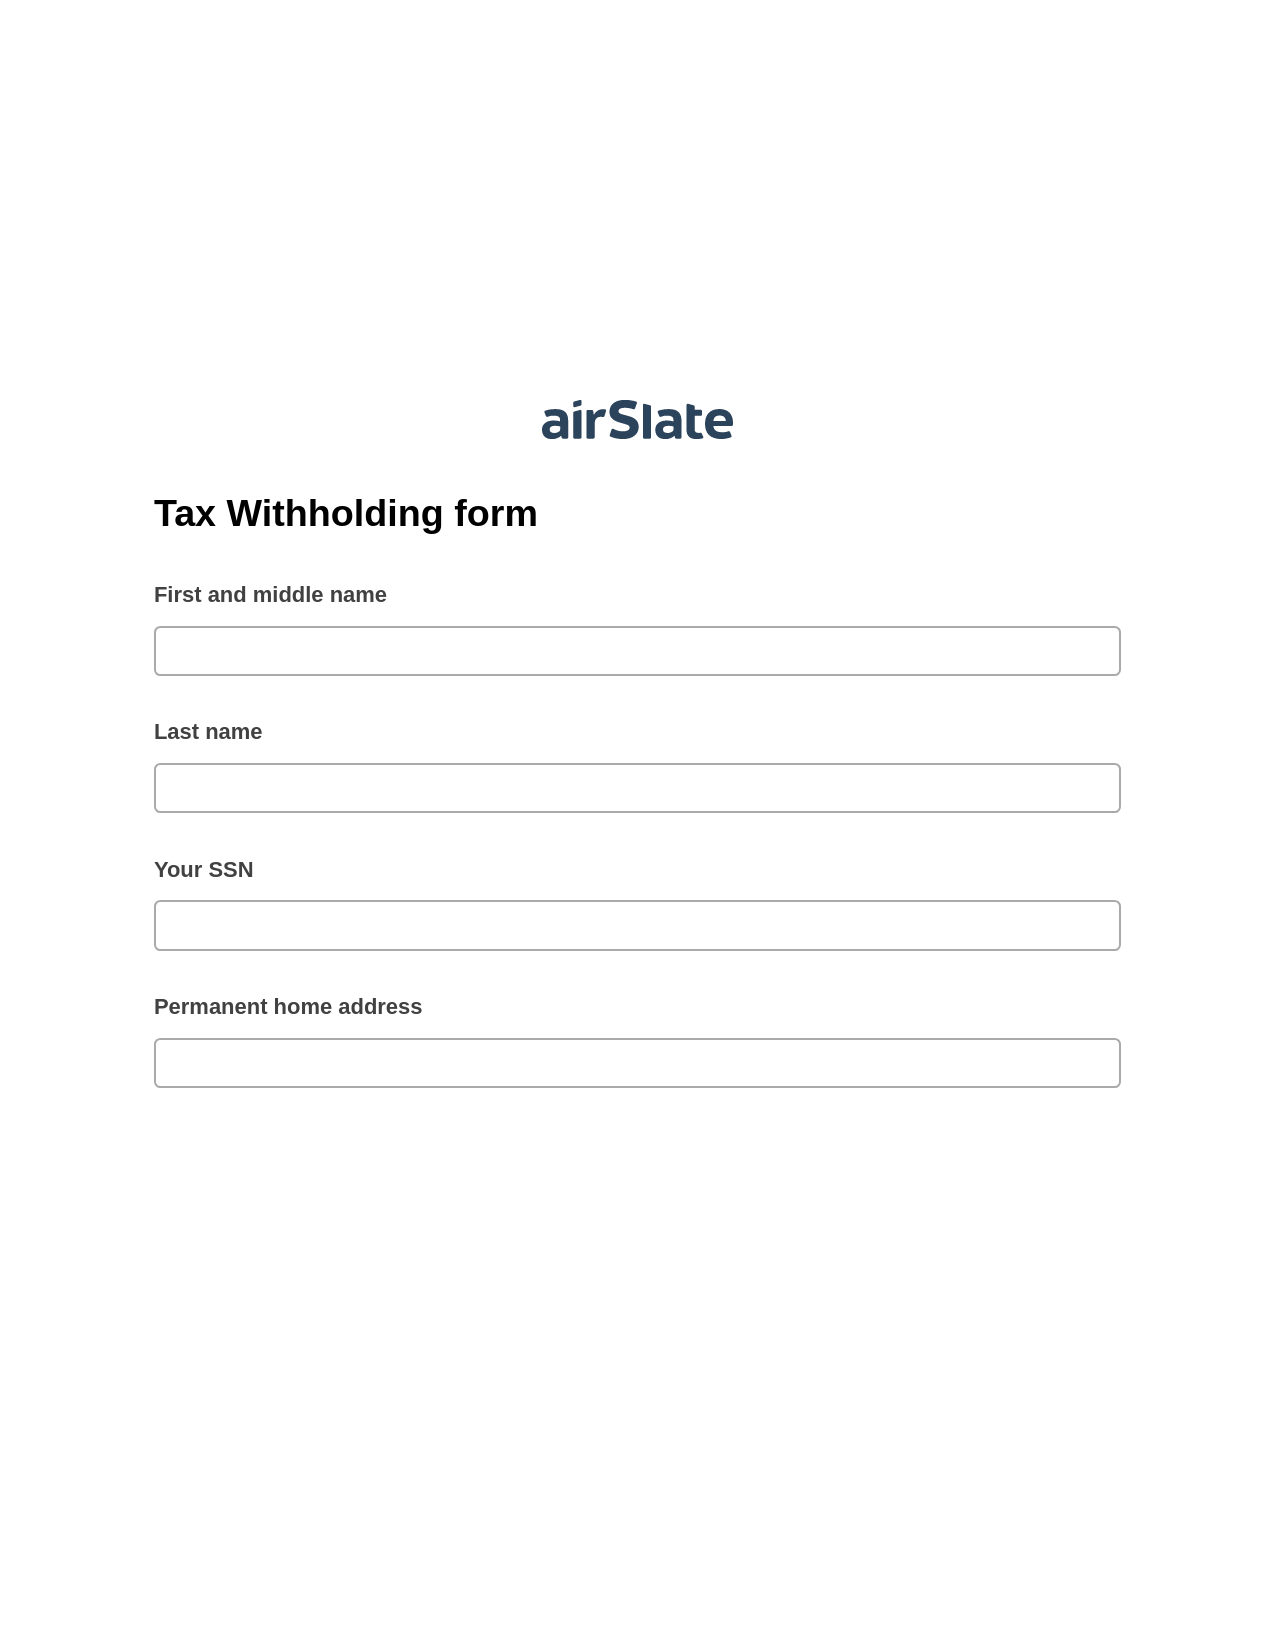 Tax Withholding form Pre-fill from CSV File Bot, Create MS Dynamics 365 Records Bot, Export to Google Sheet Bot